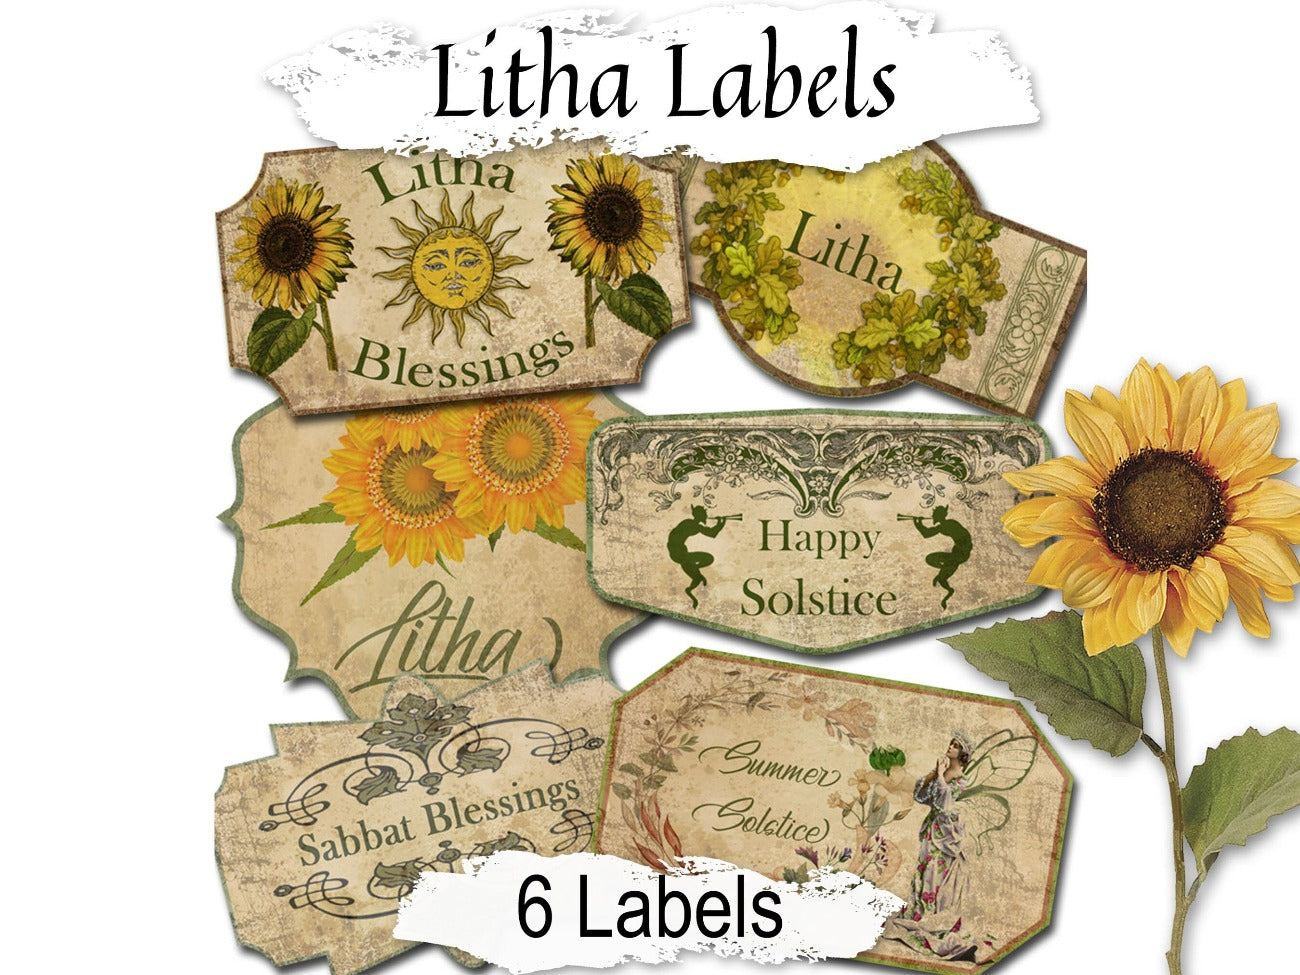 LITHA LABELS, 6 Printable Tags - 2 sizes, Use them for Rituals, Spells, Gifts and Sabbat Blessings - Morgana Magick Spell